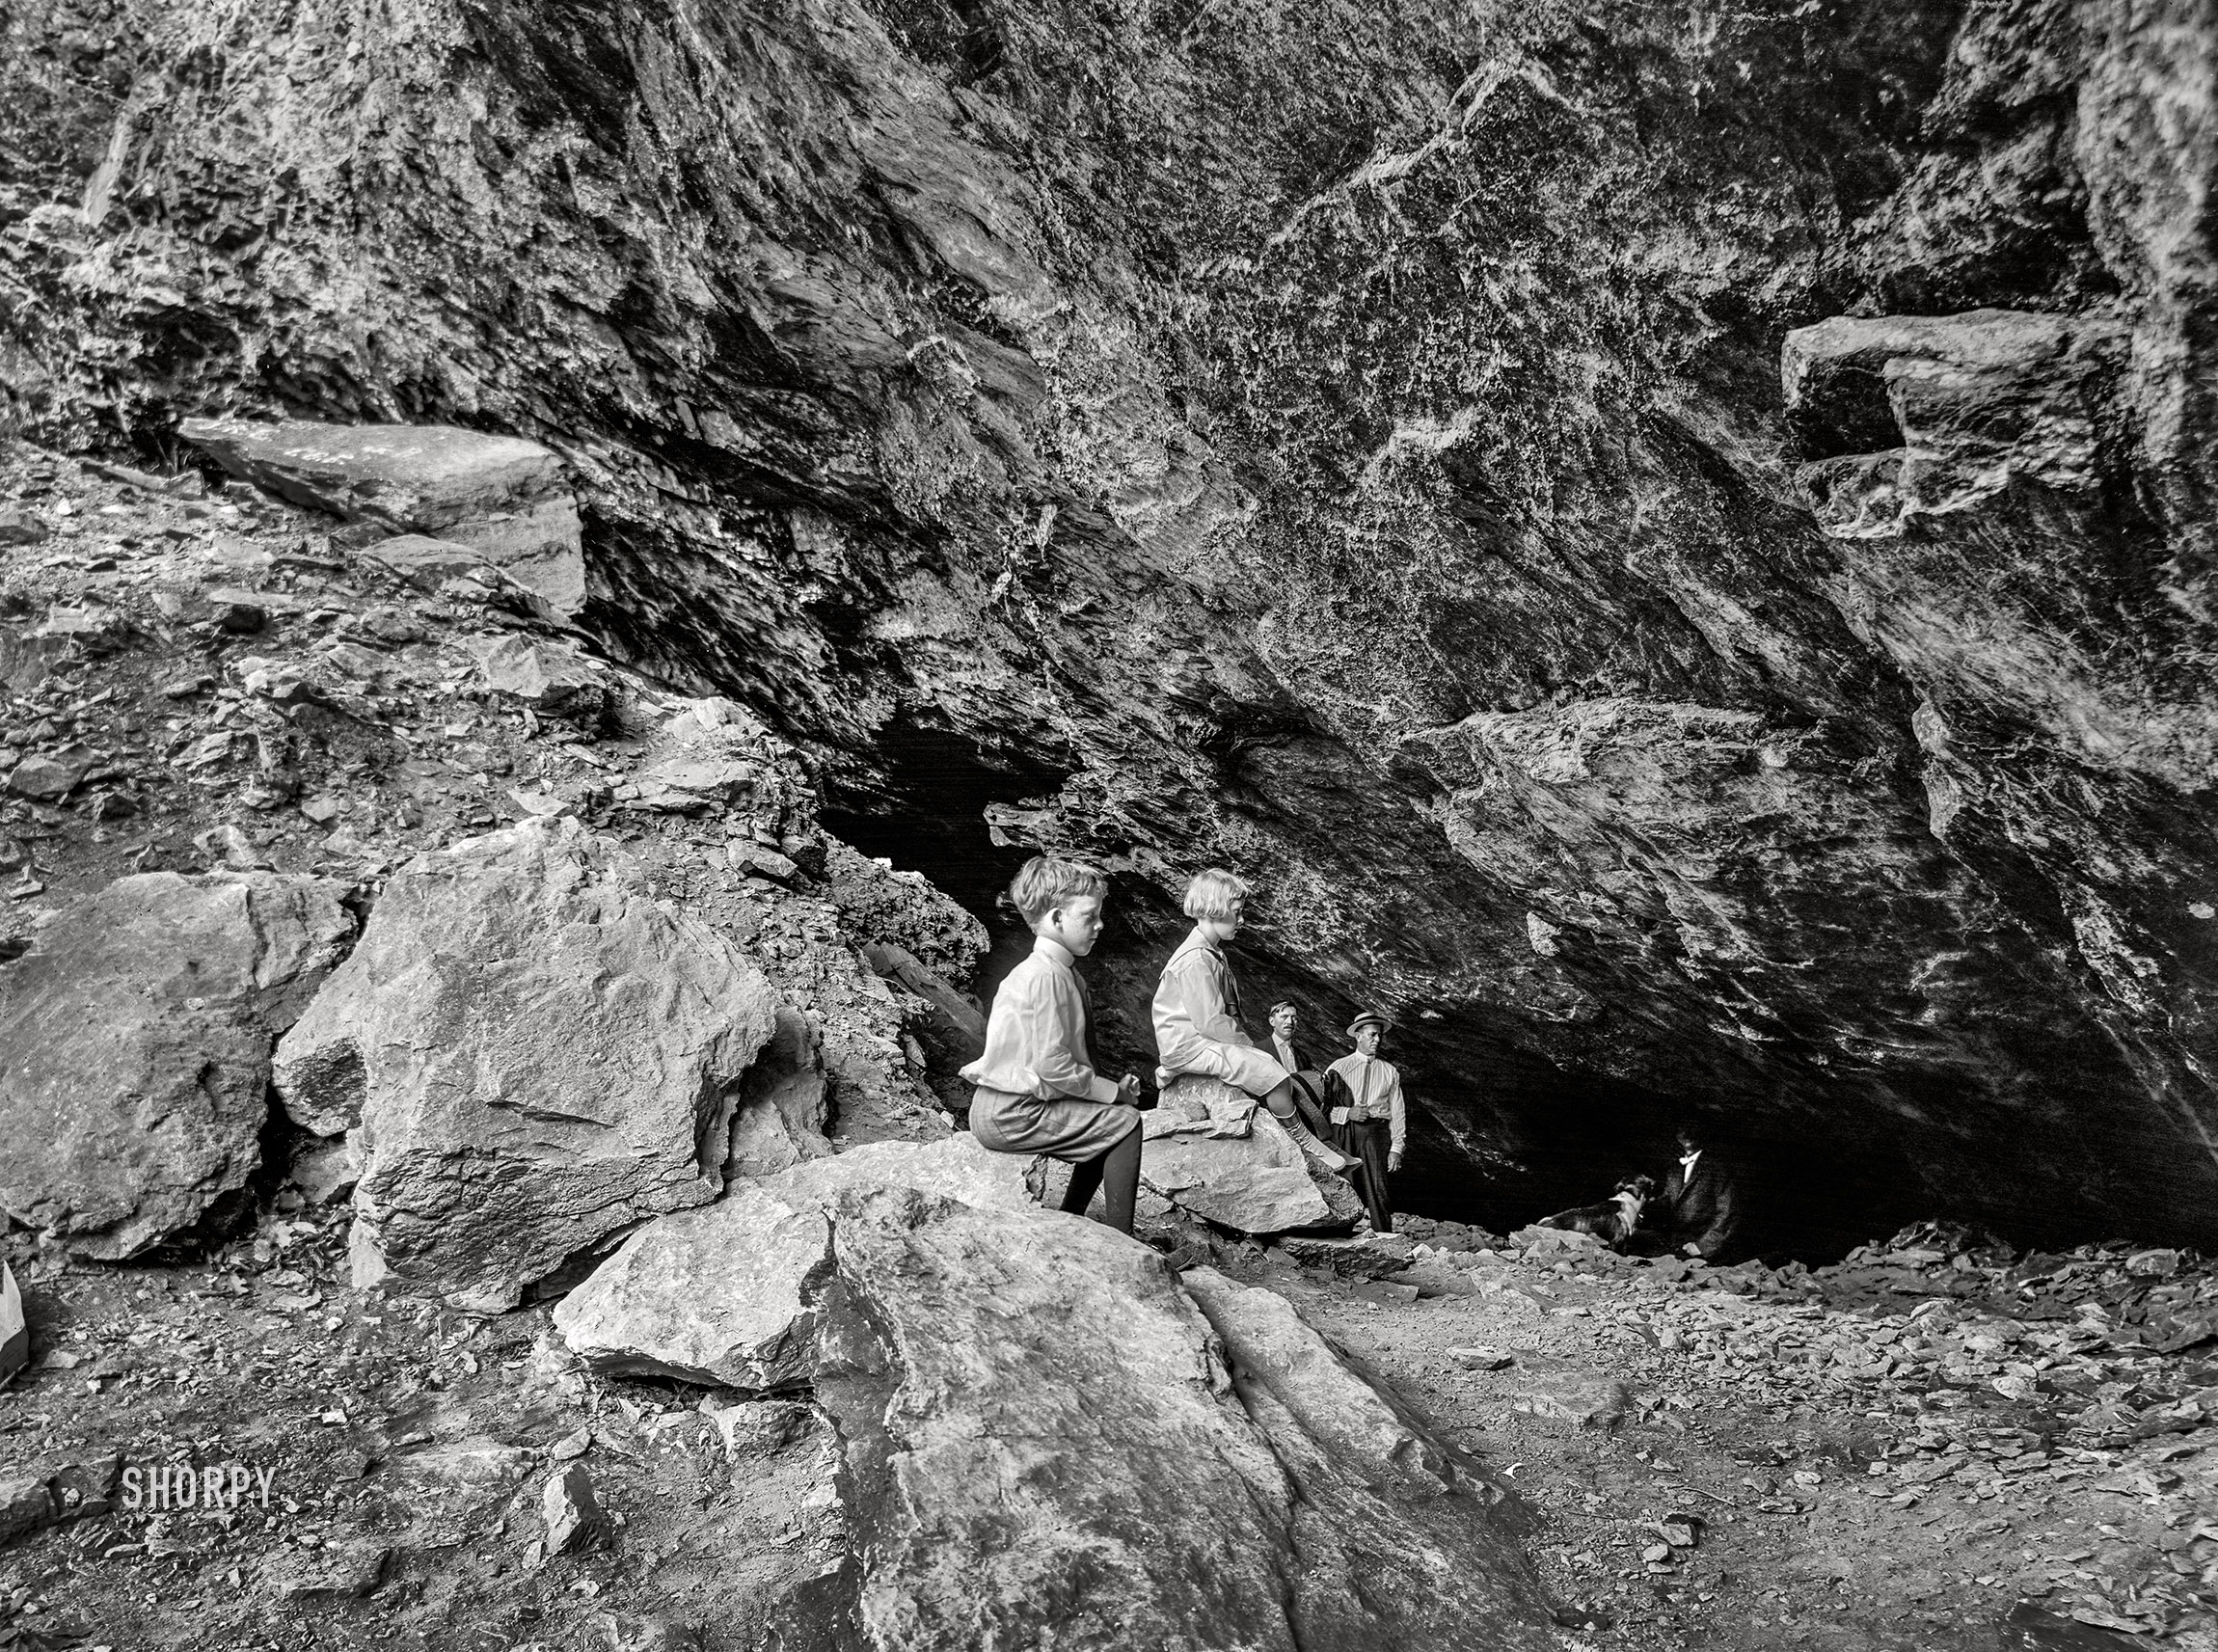 Circa 1910. "Saltpeter Cave, Natural Bridge, Virginia." Charter members of the Edward Gorey Spelunking Club (Junior Division). 8x10 glass negative, Detroit Publishing Co. View full size.